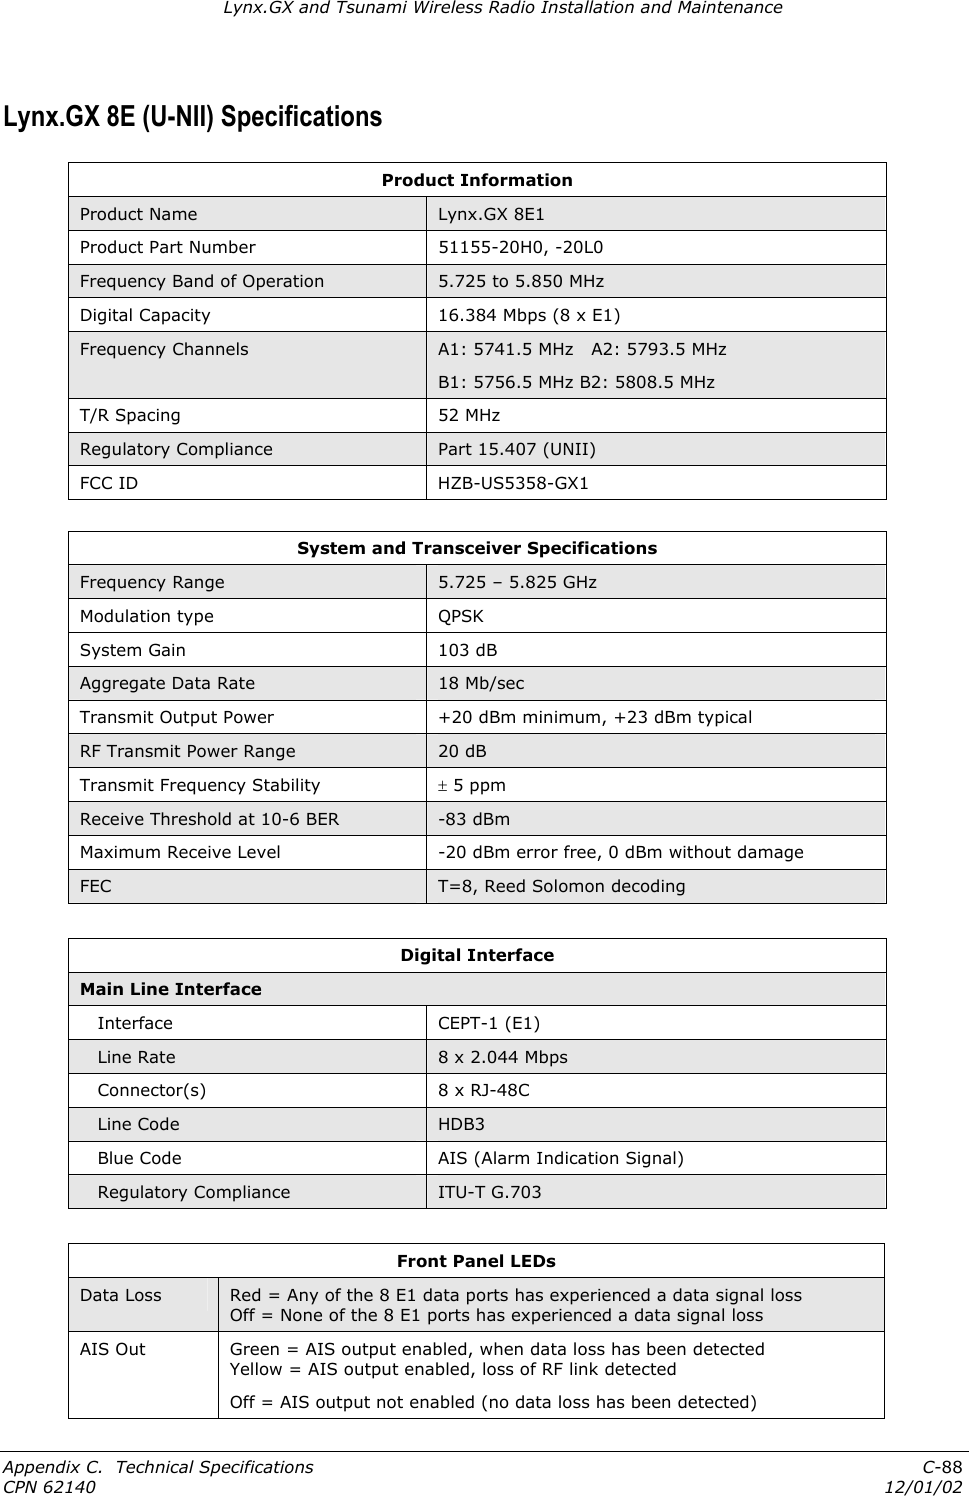 Lynx.GX and Tsunami Wireless Radio Installation and Maintenance Lynx.GX 8E (U-NII) Specifications Product Information Product Name  Lynx.GX 8E1  Product Part Number  51155-20H0, -20L0 Frequency Band of Operation  5.725 to 5.850 MHz Digital Capacity  16.384 Mbps (8 x E1) Frequency Channels  A1: 5741.5 MHz   A2: 5793.5 MHz B1: 5756.5 MHz B2: 5808.5 MHz T/R Spacing  52 MHz Regulatory Compliance  Part 15.407 (UNII) FCC ID  HZB-US5358-GX1  System and Transceiver Specifications Frequency Range  5.725 – 5.825 GHz Modulation type  QPSK System Gain  103 dB Aggregate Data Rate  18 Mb/sec Transmit Output Power  +20 dBm minimum, +23 dBm typical RF Transmit Power Range  20 dB Transmit Frequency Stability  ± 5 ppm  Receive Threshold at 10-6 BER  -83 dBm Maximum Receive Level  -20 dBm error free, 0 dBm without damage FEC  T=8, Reed Solomon decoding  Digital Interface Main Line Interface    Interface  CEPT-1 (E1)    Line Rate  8 x 2.044 Mbps     Connector(s)  8 x RJ-48C    Line Code  HDB3    Blue Code  AIS (Alarm Indication Signal)    Regulatory Compliance  ITU-T G.703  Front Panel LEDs Data Loss  Red = Any of the 8 E1 data ports has experienced a data signal loss Off = None of the 8 E1 ports has experienced a data signal loss AIS Out  Green = AIS output enabled, when data loss has been detected Yellow = AIS output enabled, loss of RF link detected Off = AIS output not enabled (no data loss has been detected) Appendix C.  Technical Specifications  C-88 CPN 62140  12/01/02 